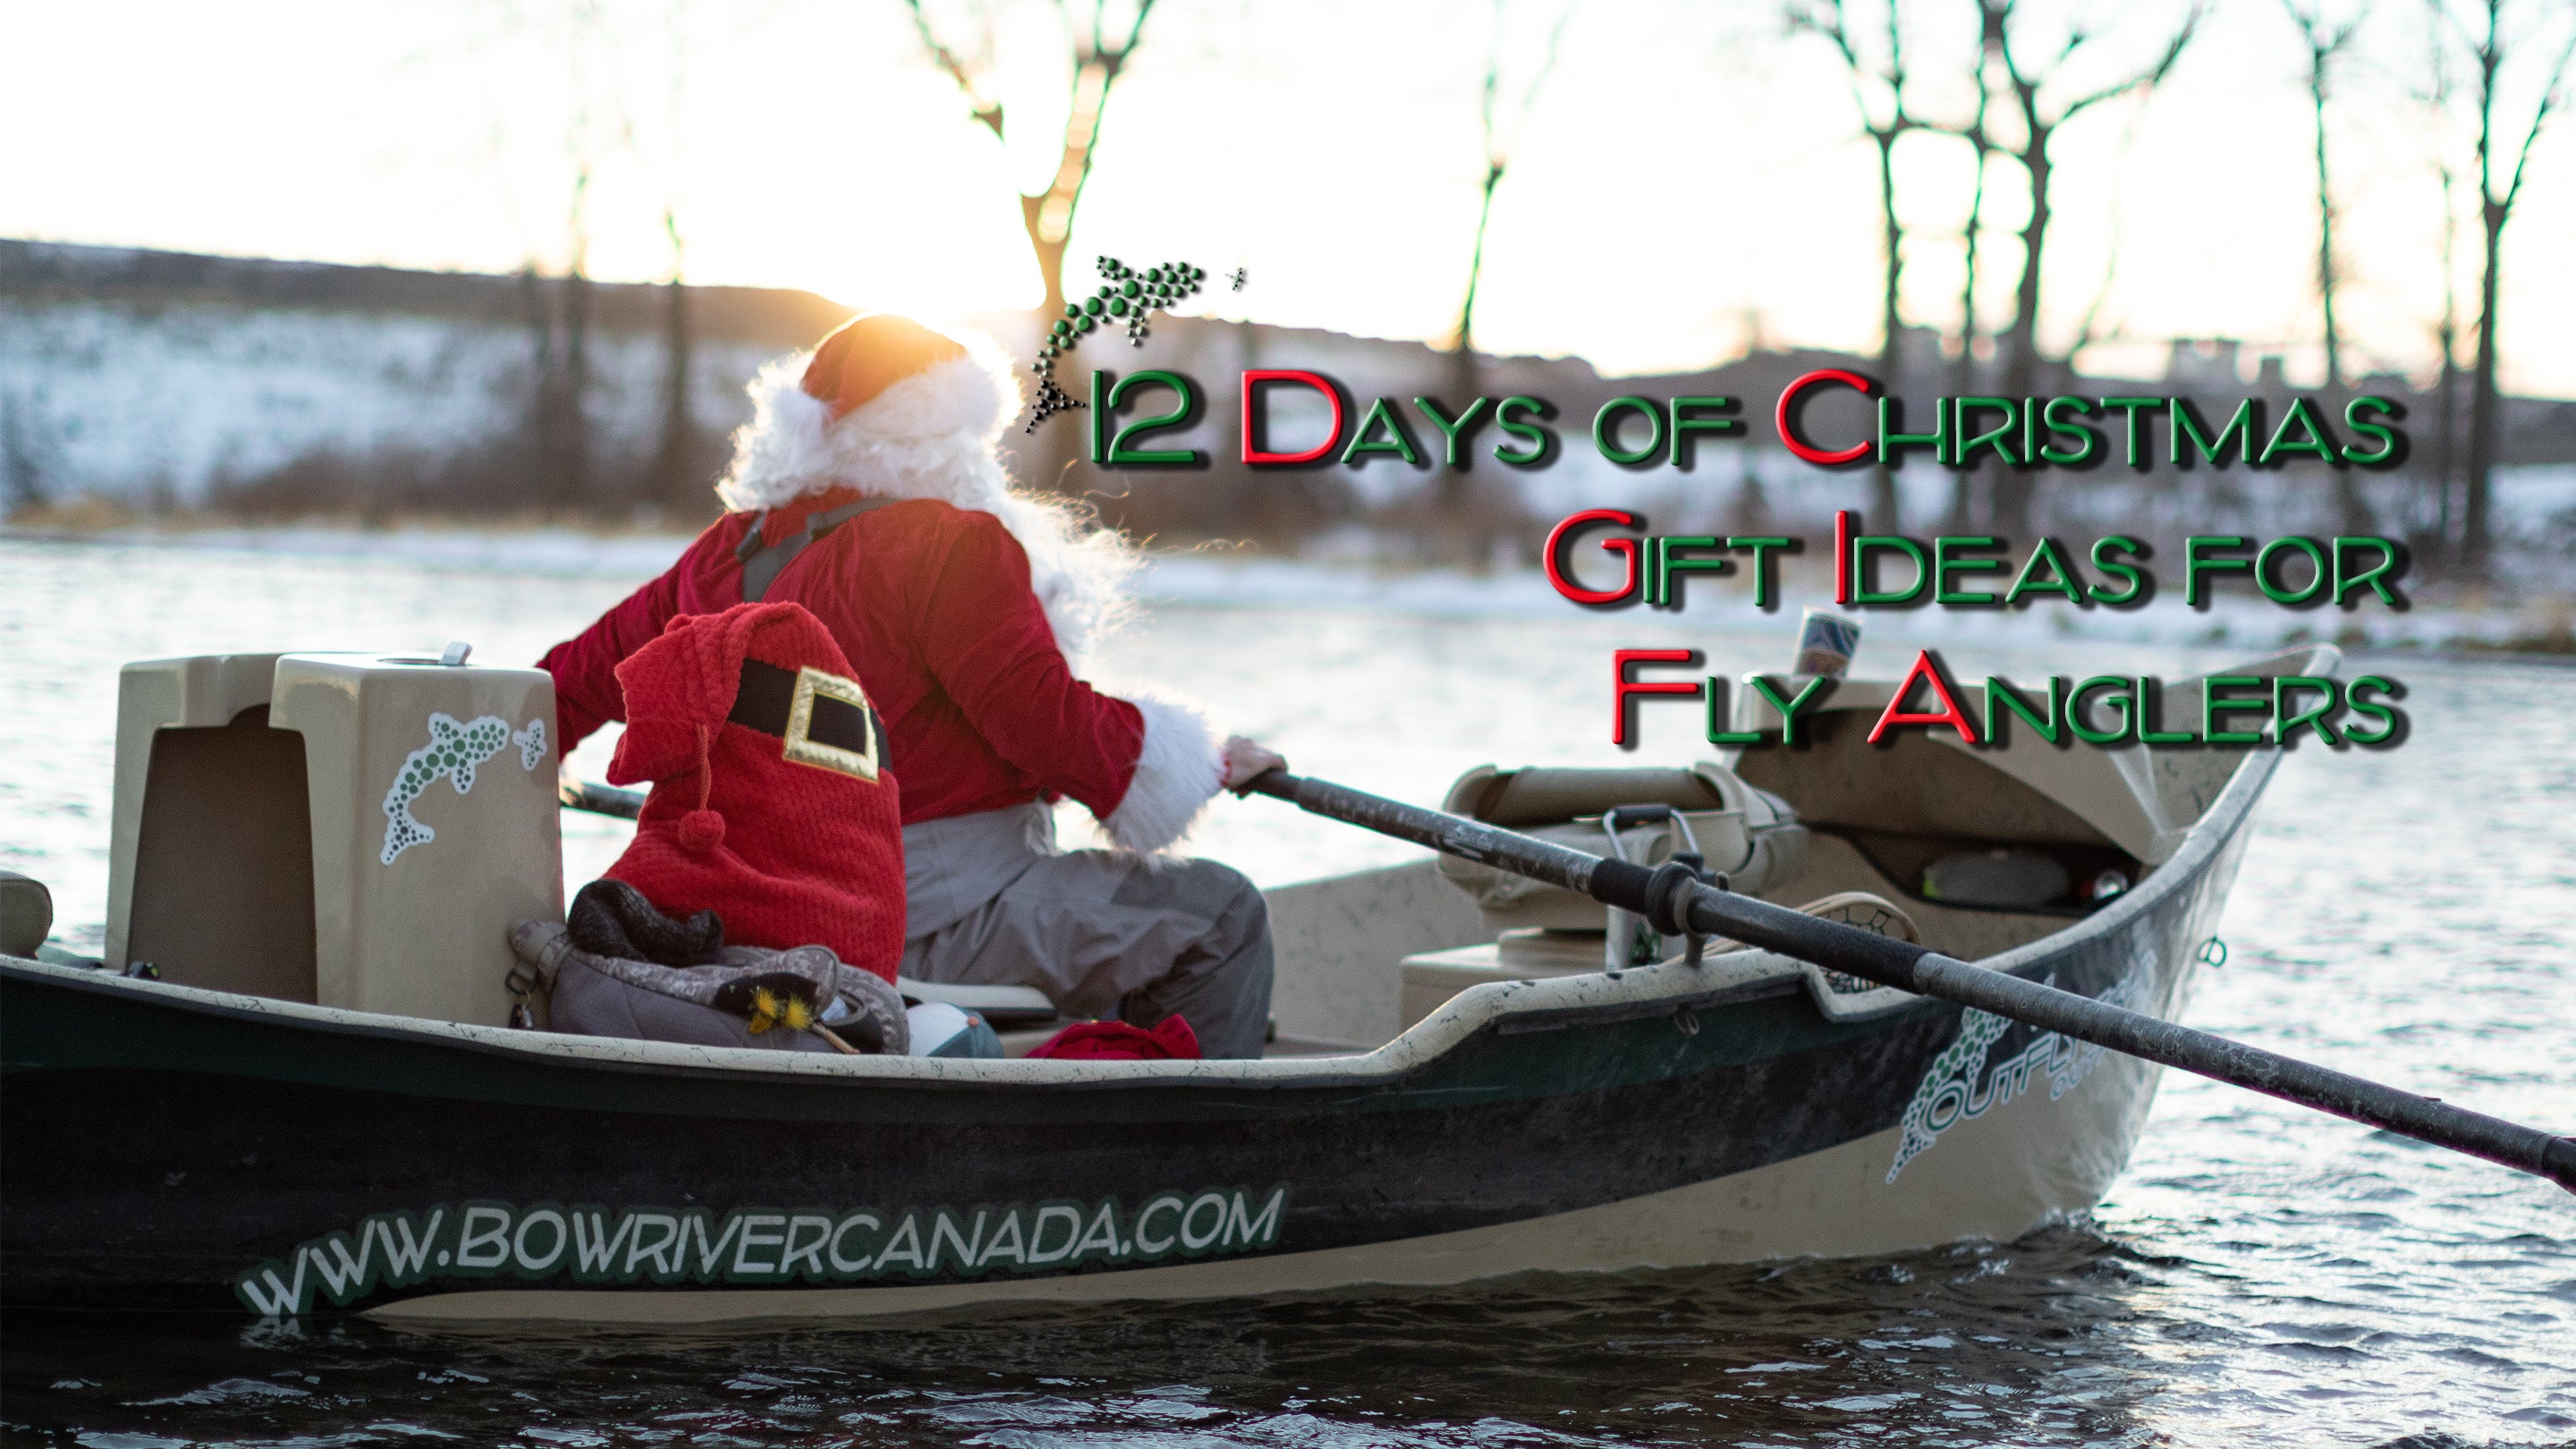 12 Days of Christmas Gift Ideas for Fly Anglers for 2021